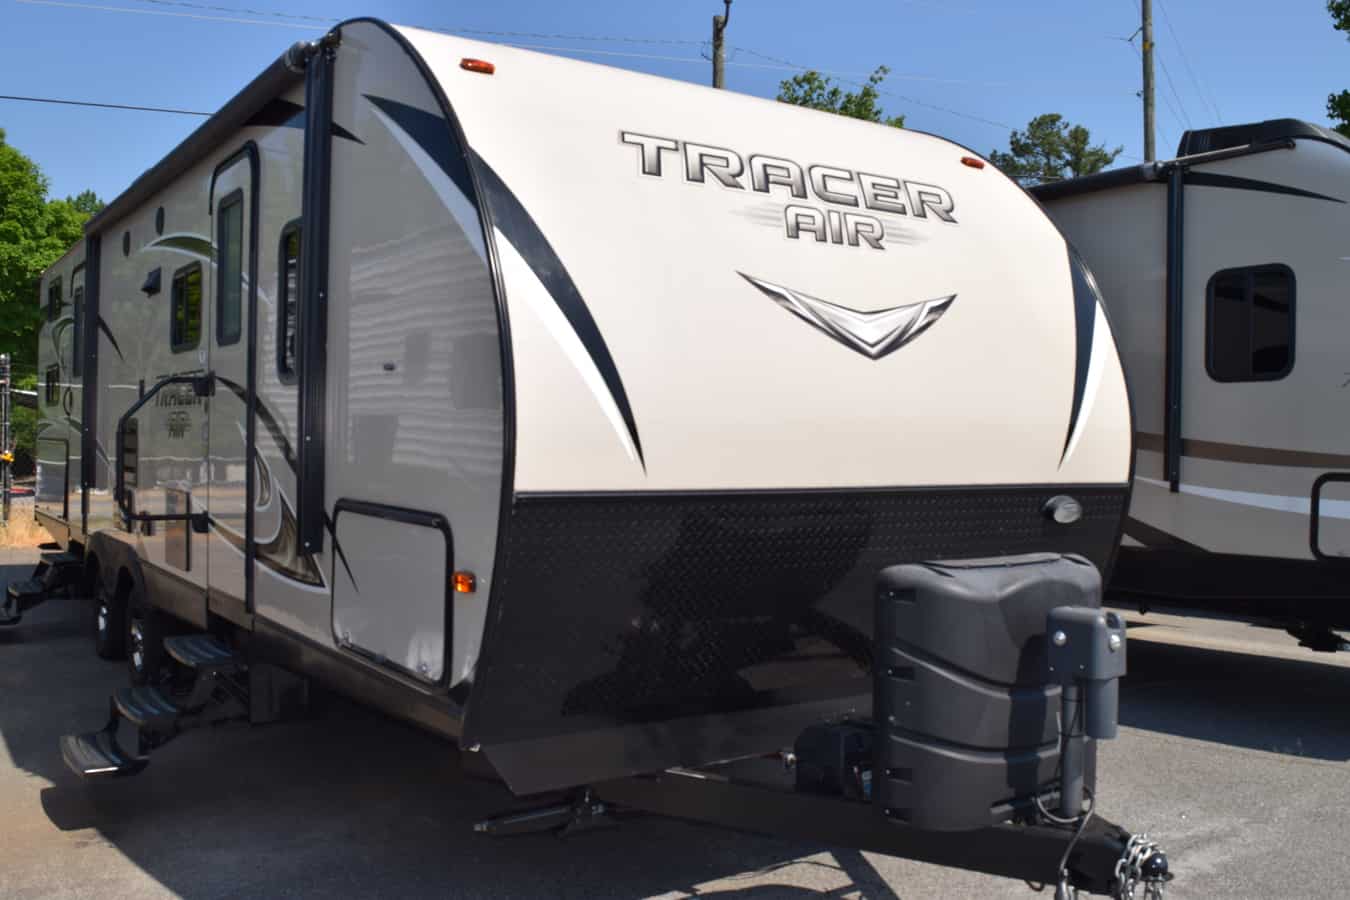 USED 2017 Tracer TRACER 305AIR